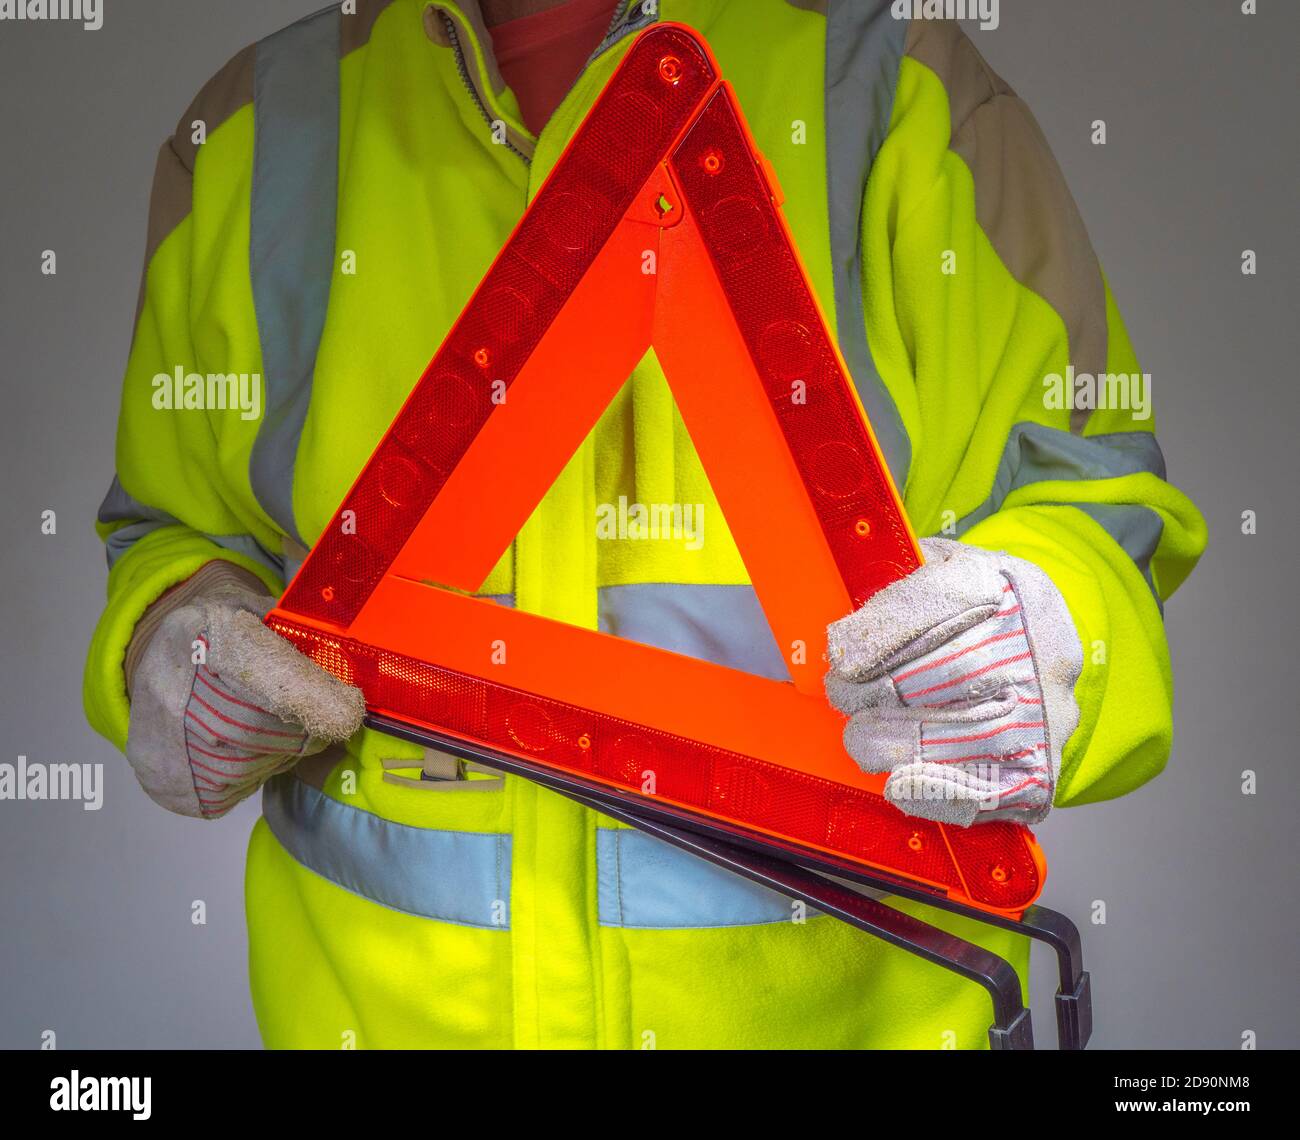 Closeup of a man wearing gloves and a fluorescent yellow, high visibility fleece safety jacket, holding an orange, reflective warning triangle. Stock Photo